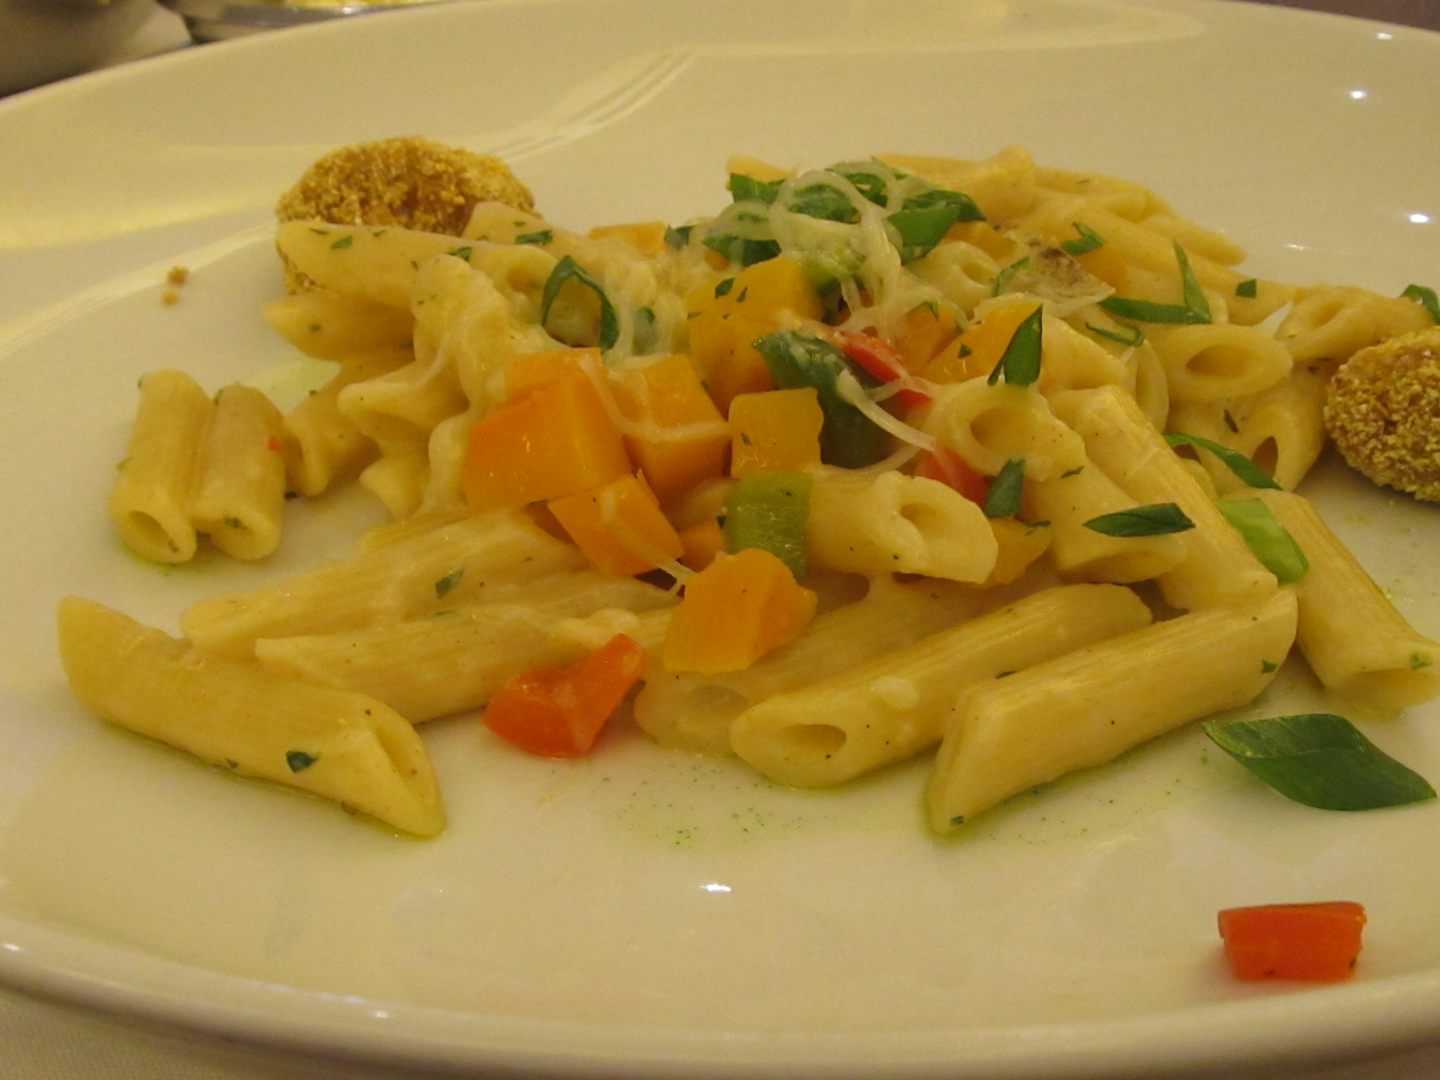 Pasta Pasta at the Star Mariner lunch